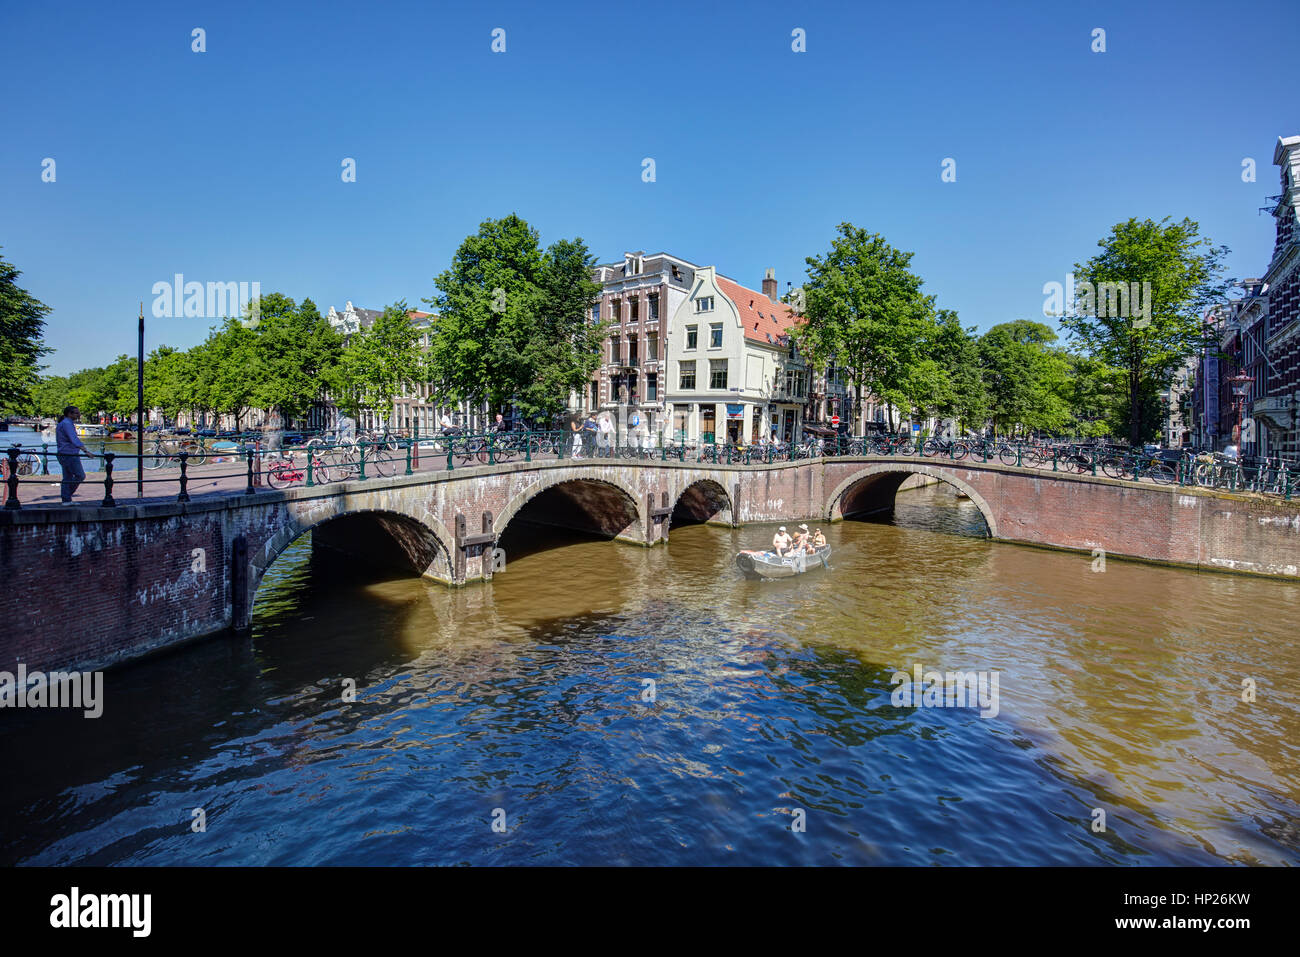 Canals in Amsterdam, Netherlands Stock Photo